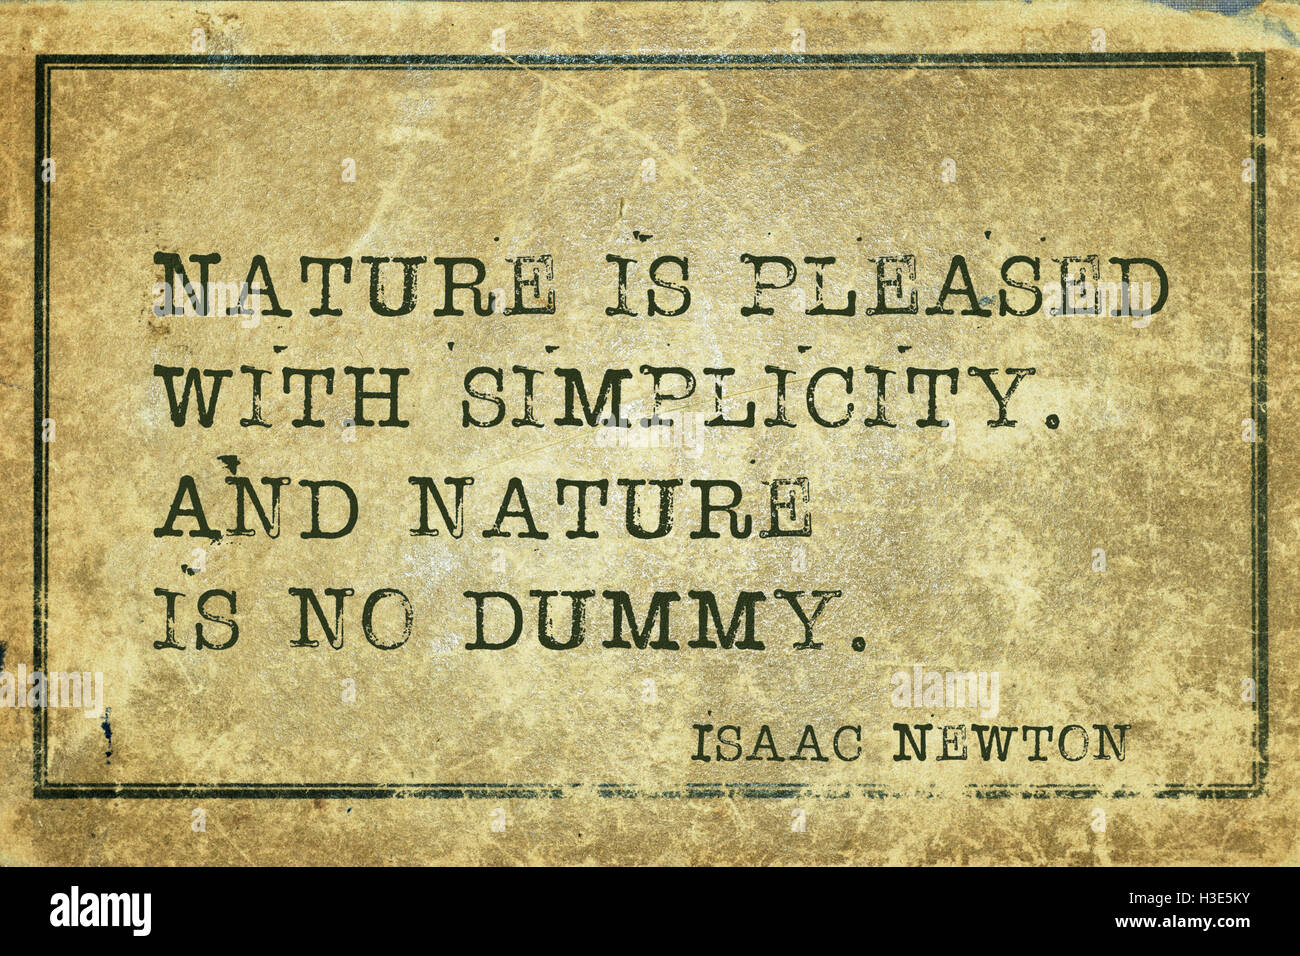 Nature is pleased with simplicity - ancient English physicist and mathematician Sir Isaac Newton quote printed on grunge vintage Stock Photo